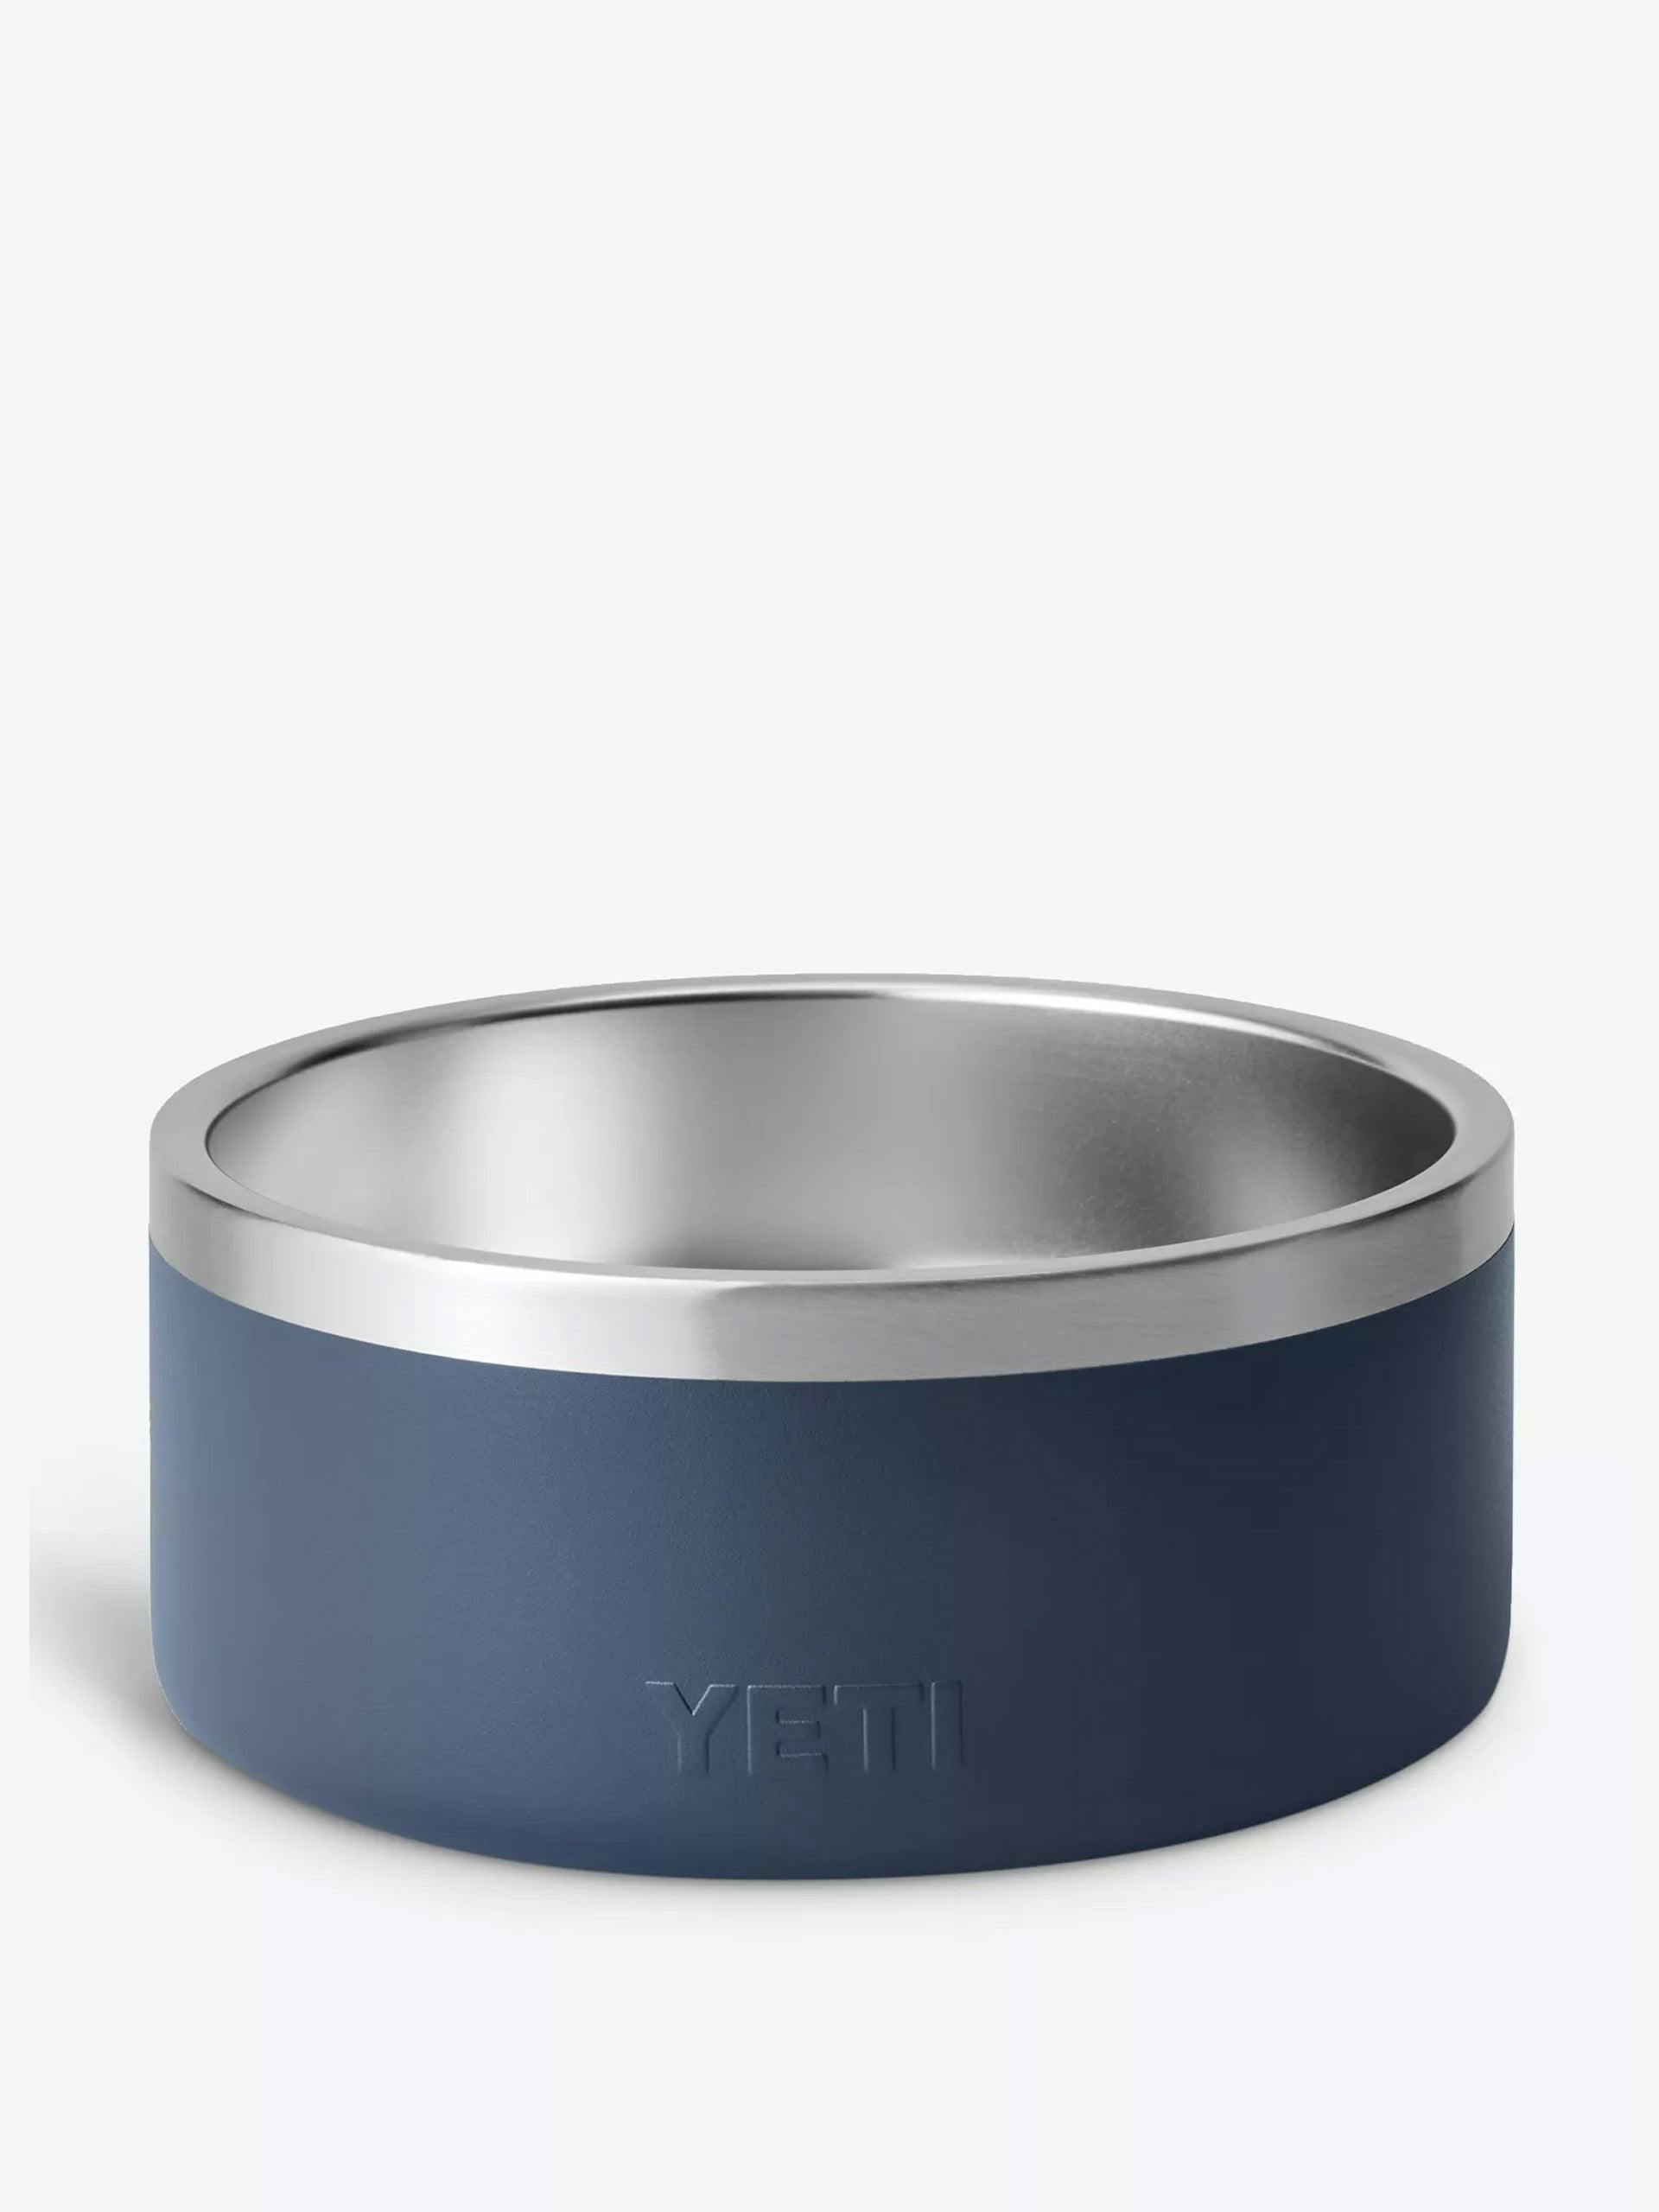 Boomer 4 stainless steel dog bowl